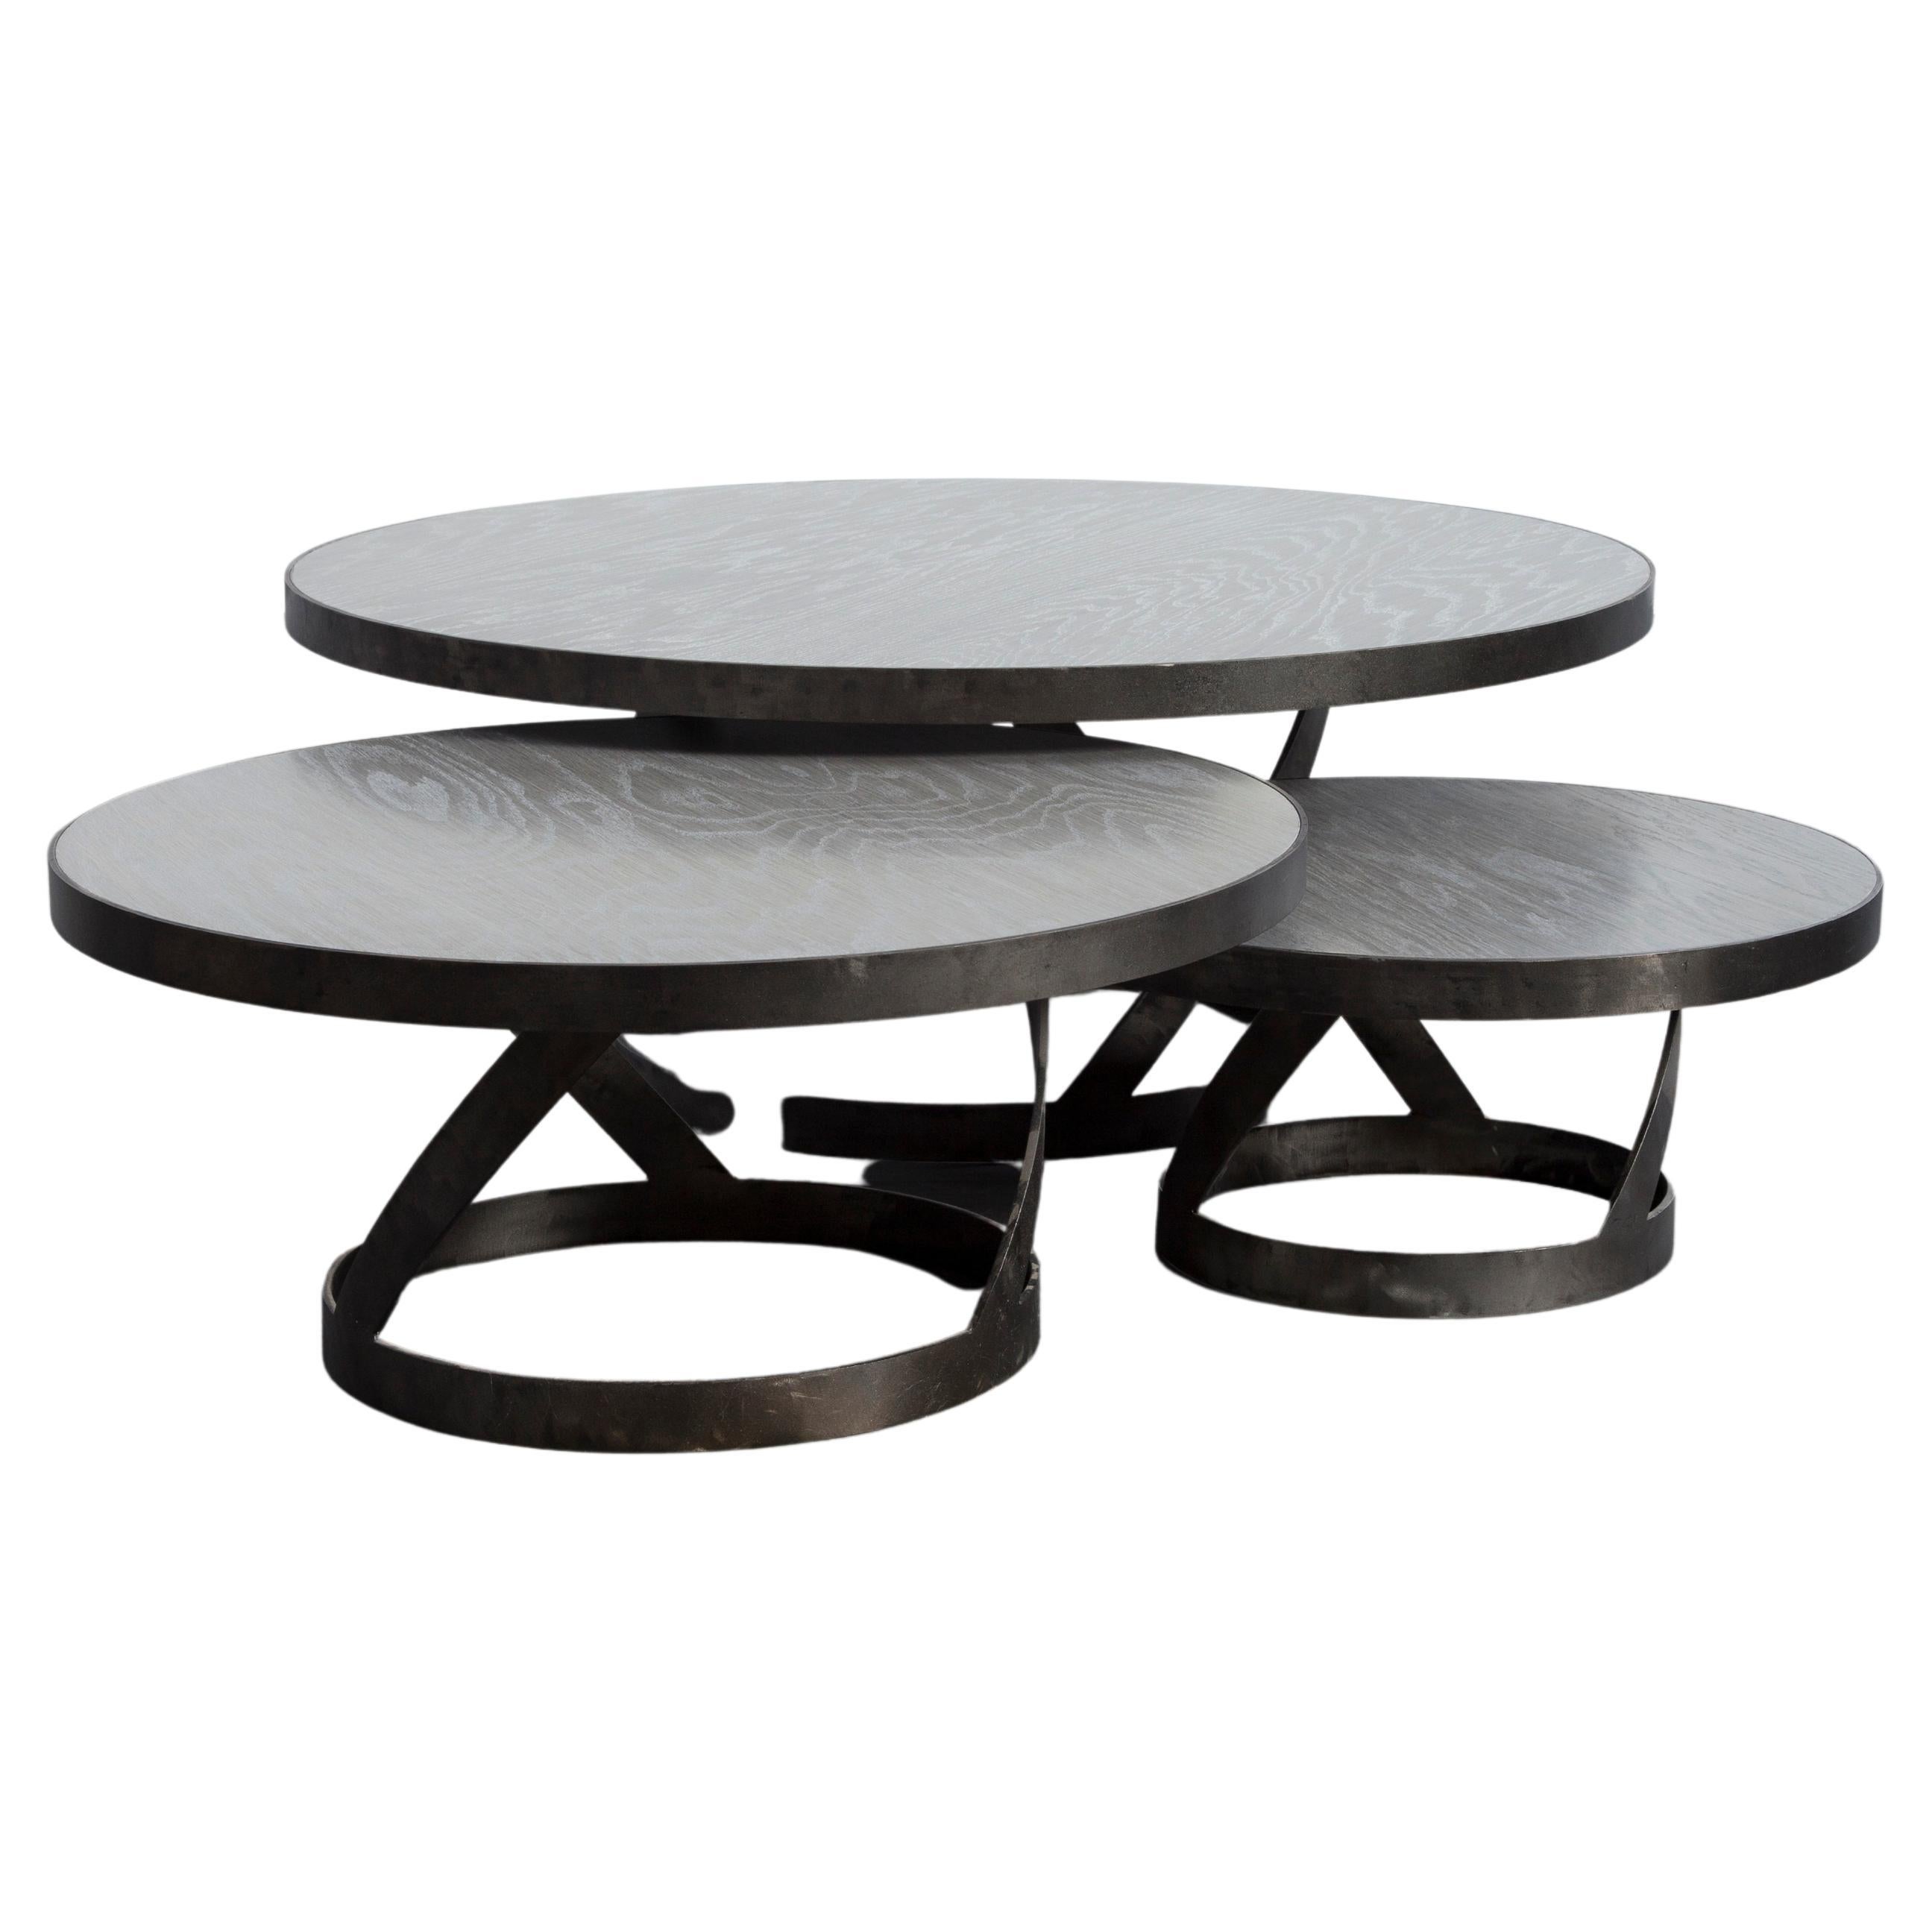 This versatile modern oak coffee table with a blackened steel spiral base provides great interest for the family or living room. Shown is the 24 inch diameter table top which is the smallest size offered. The table also comes in 31 and 42 inch